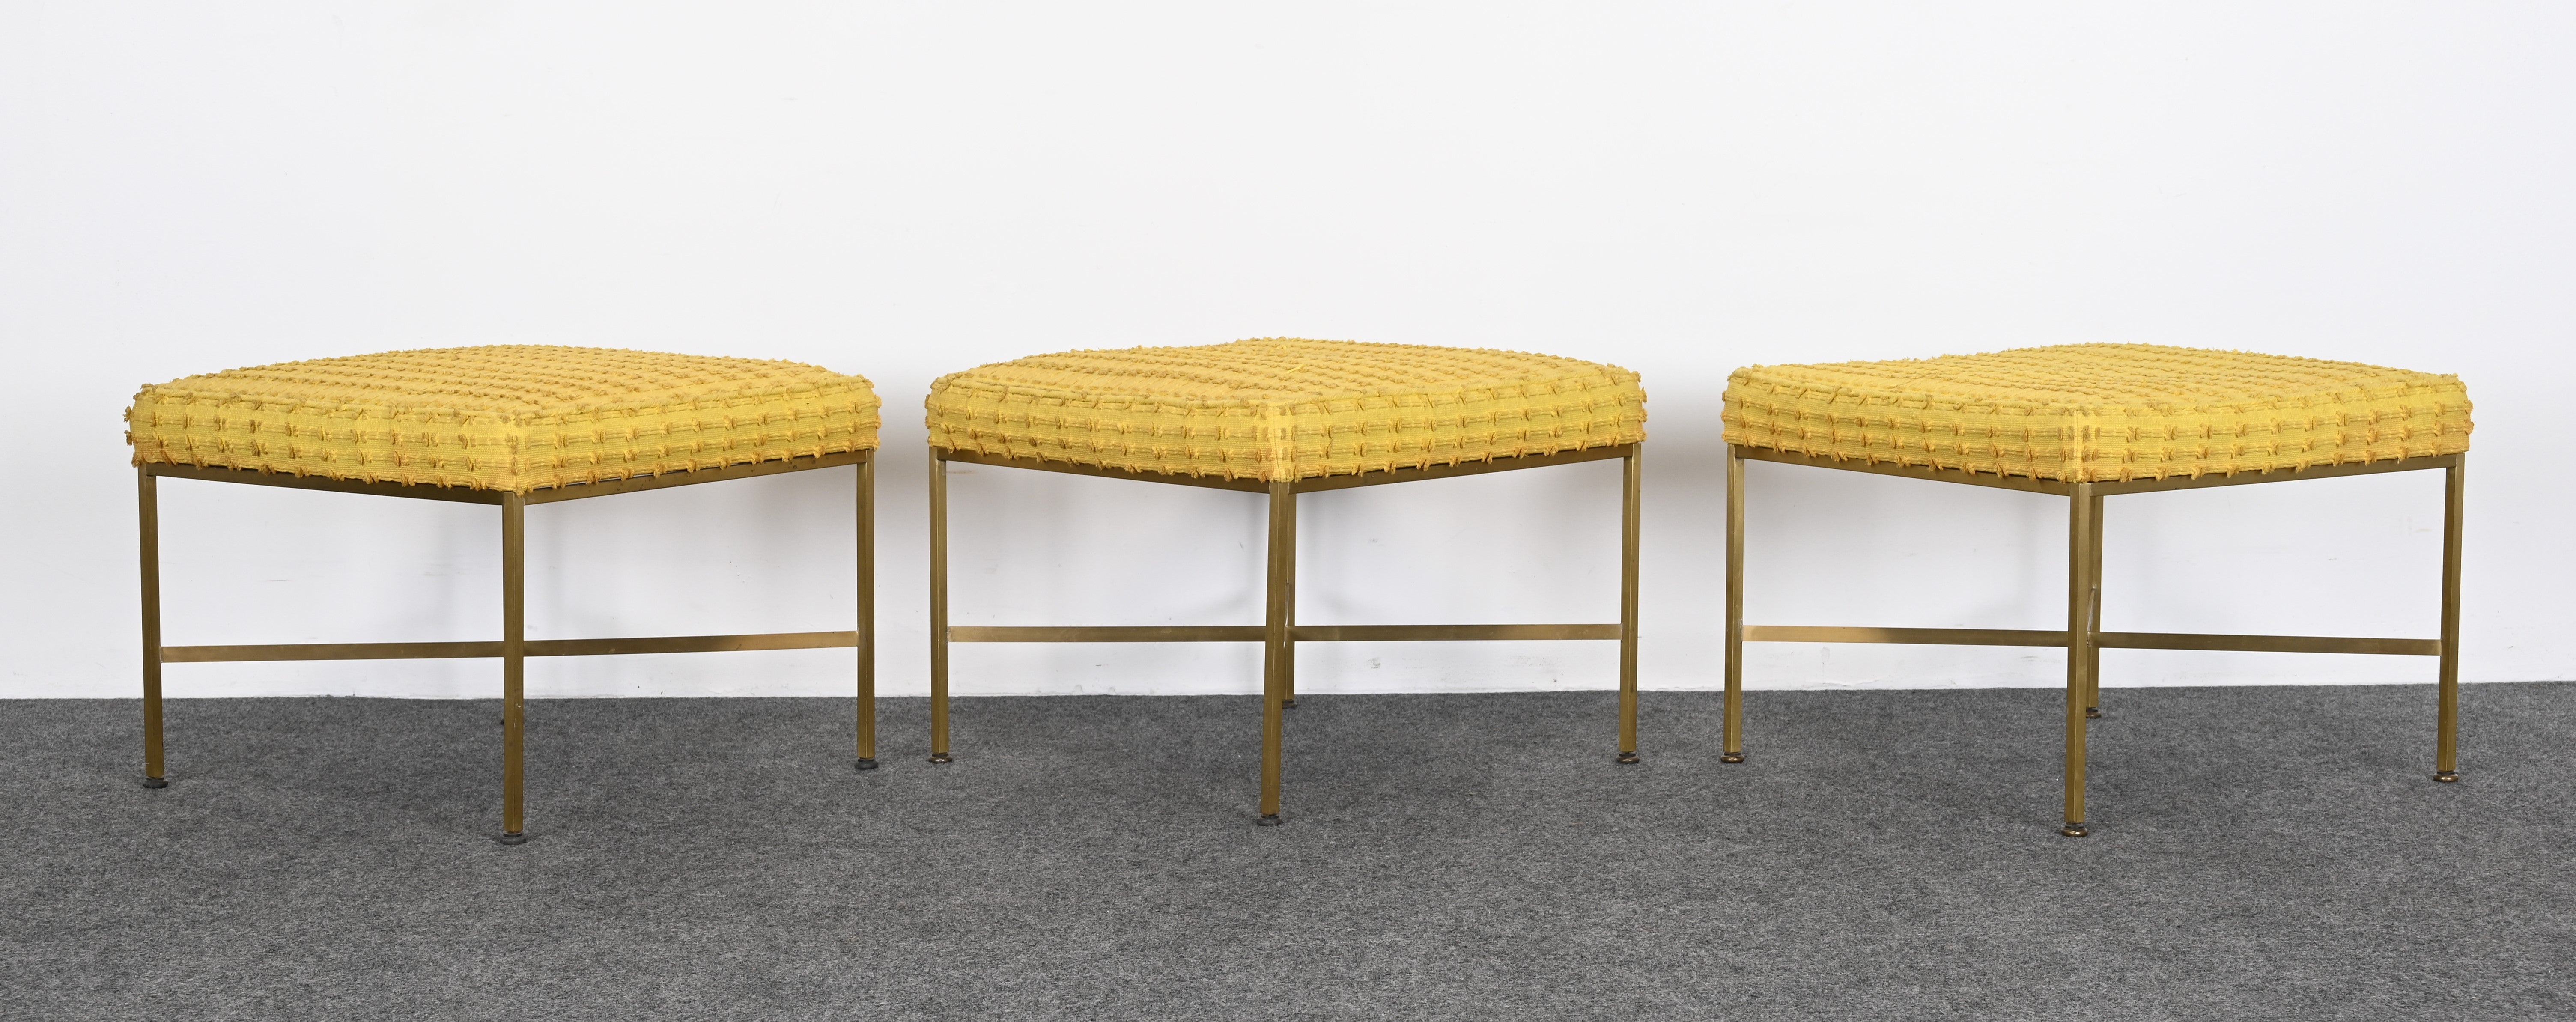 An elegant set of three brass benches with upholstery by Mid-Century designer Paul McCobb, circa 1950s. These benches are both versatile and functional and have a very minimalist design that would be great in any interior. They could be used in a